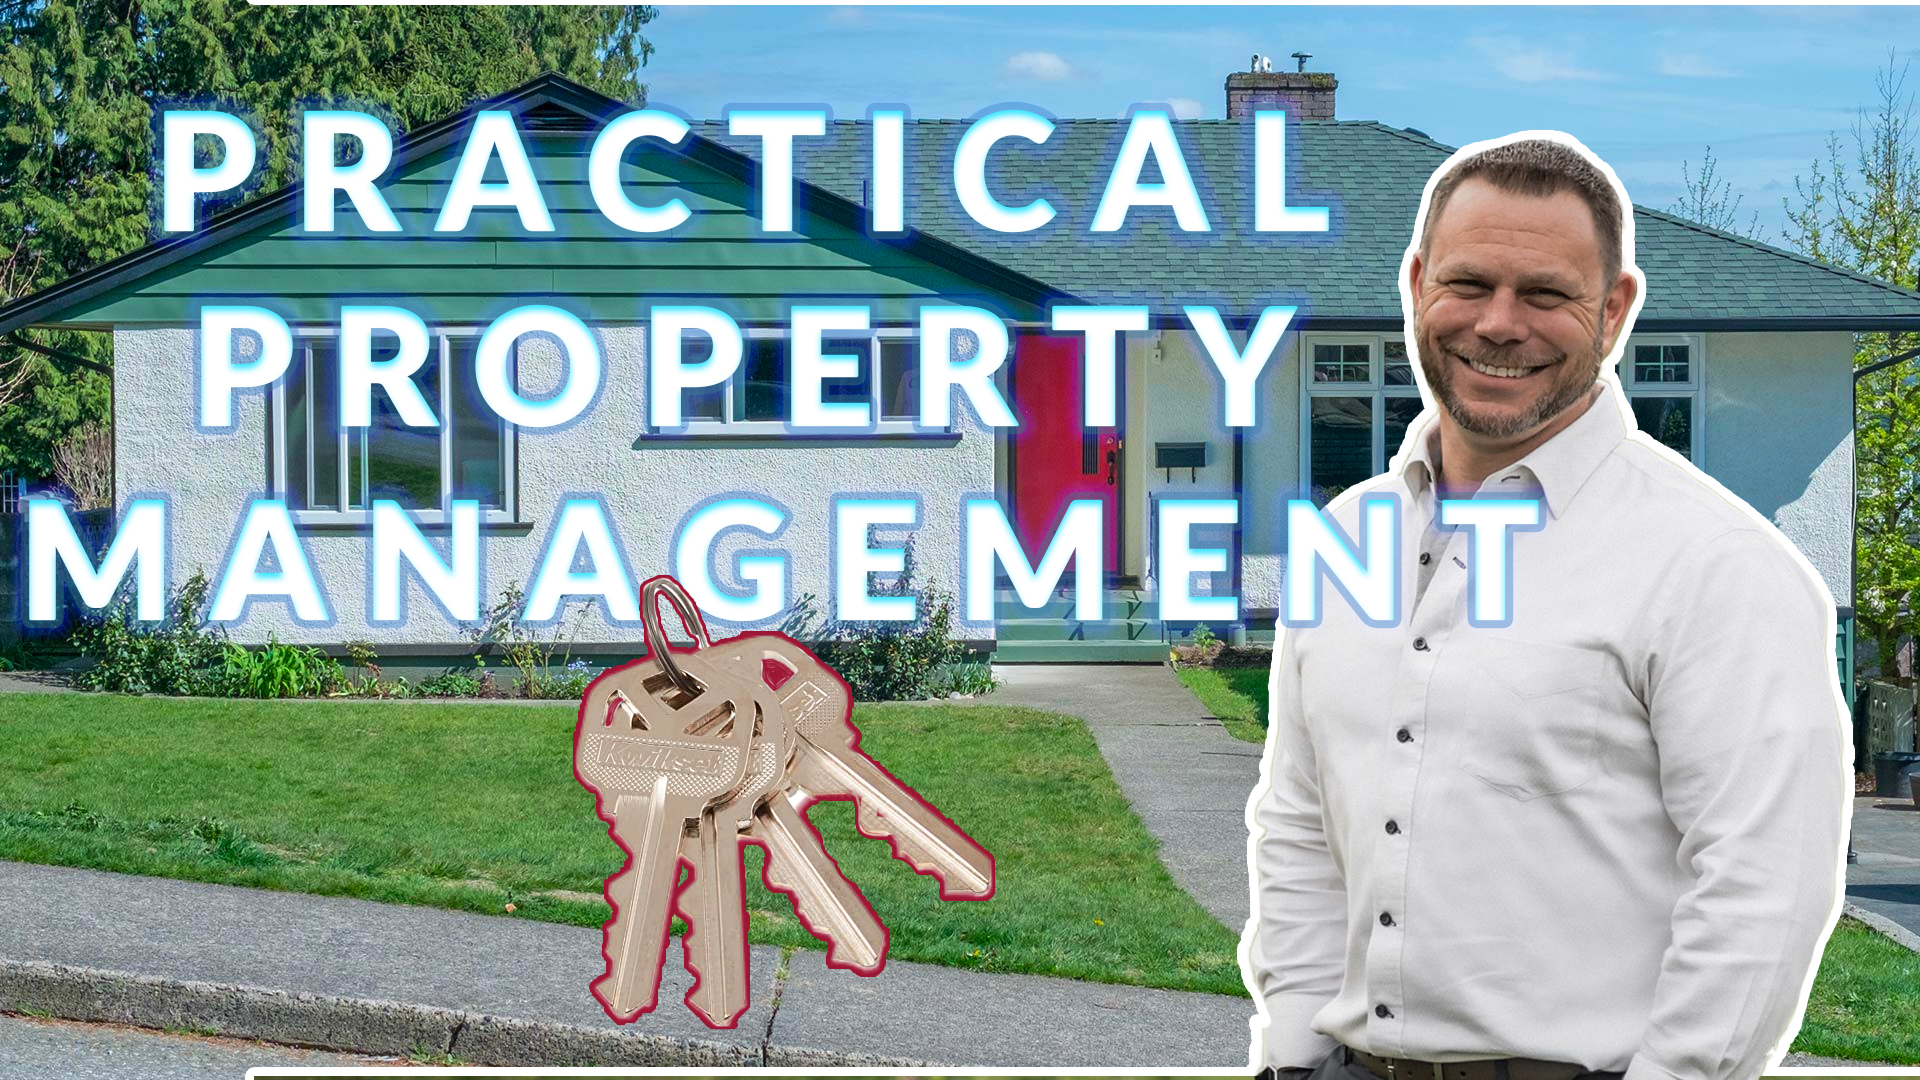 You are currently viewing 184. Practical Property Management with Al Sartorelli